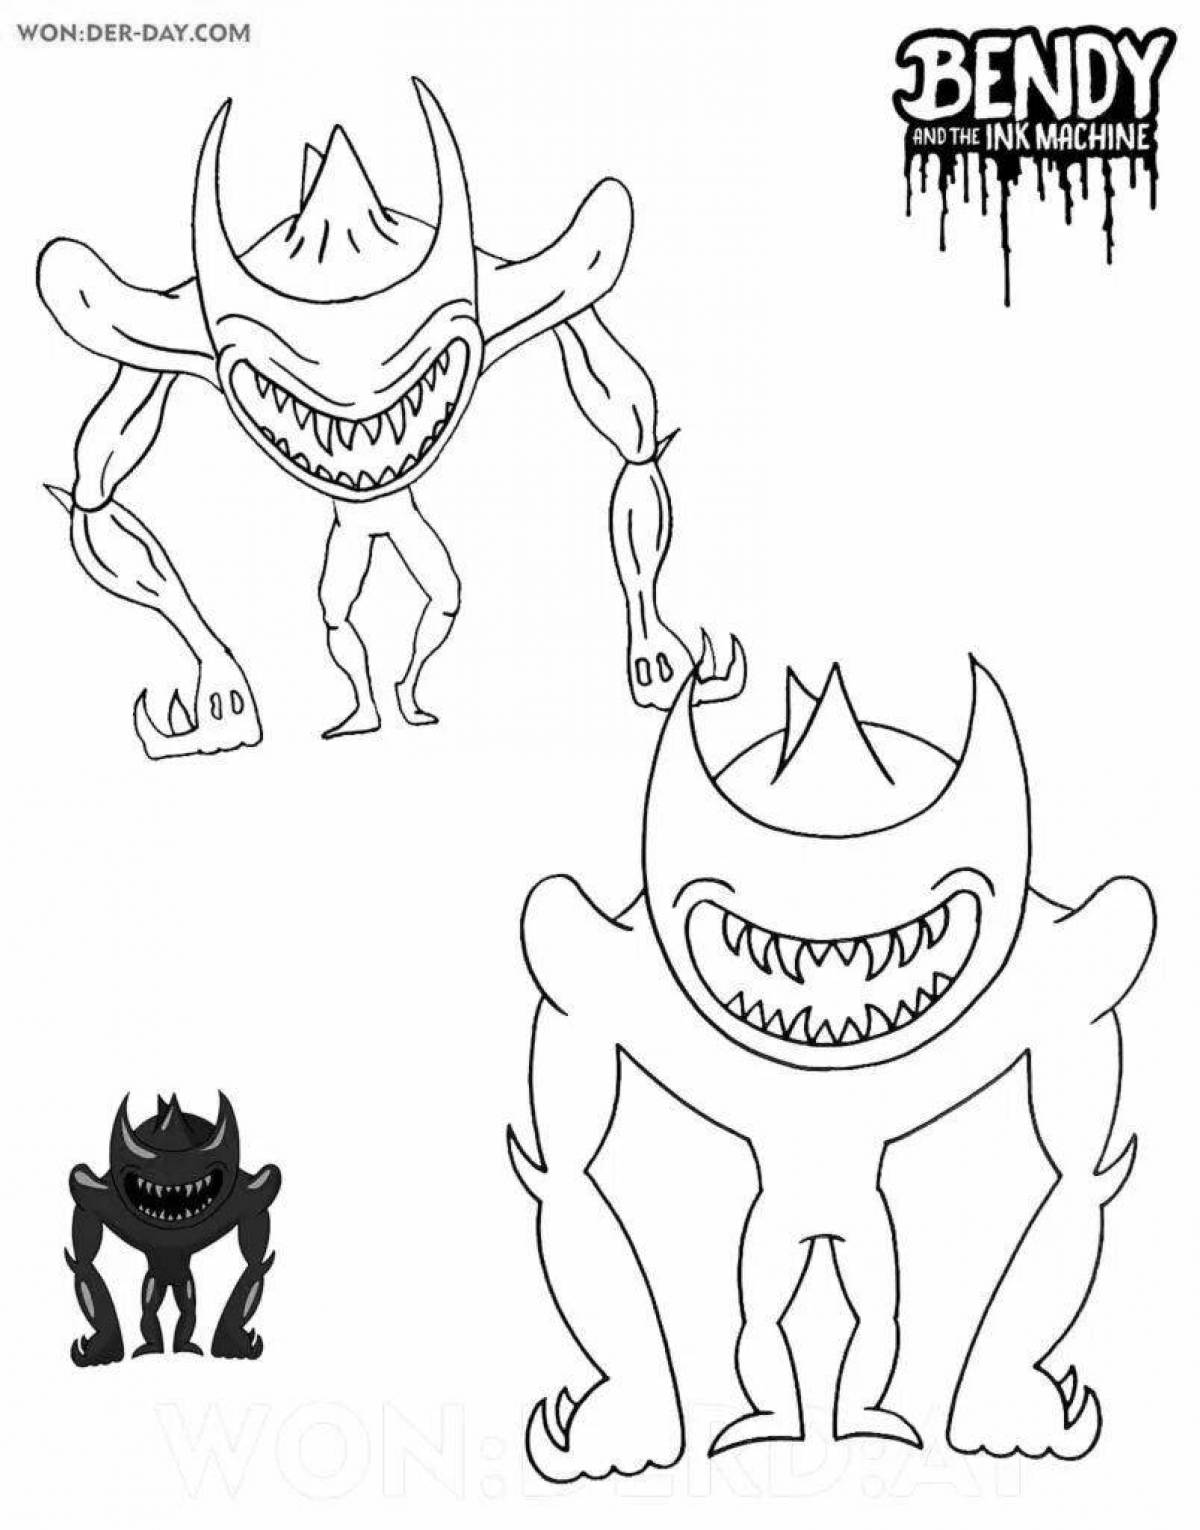 Outstanding bendy coloring page